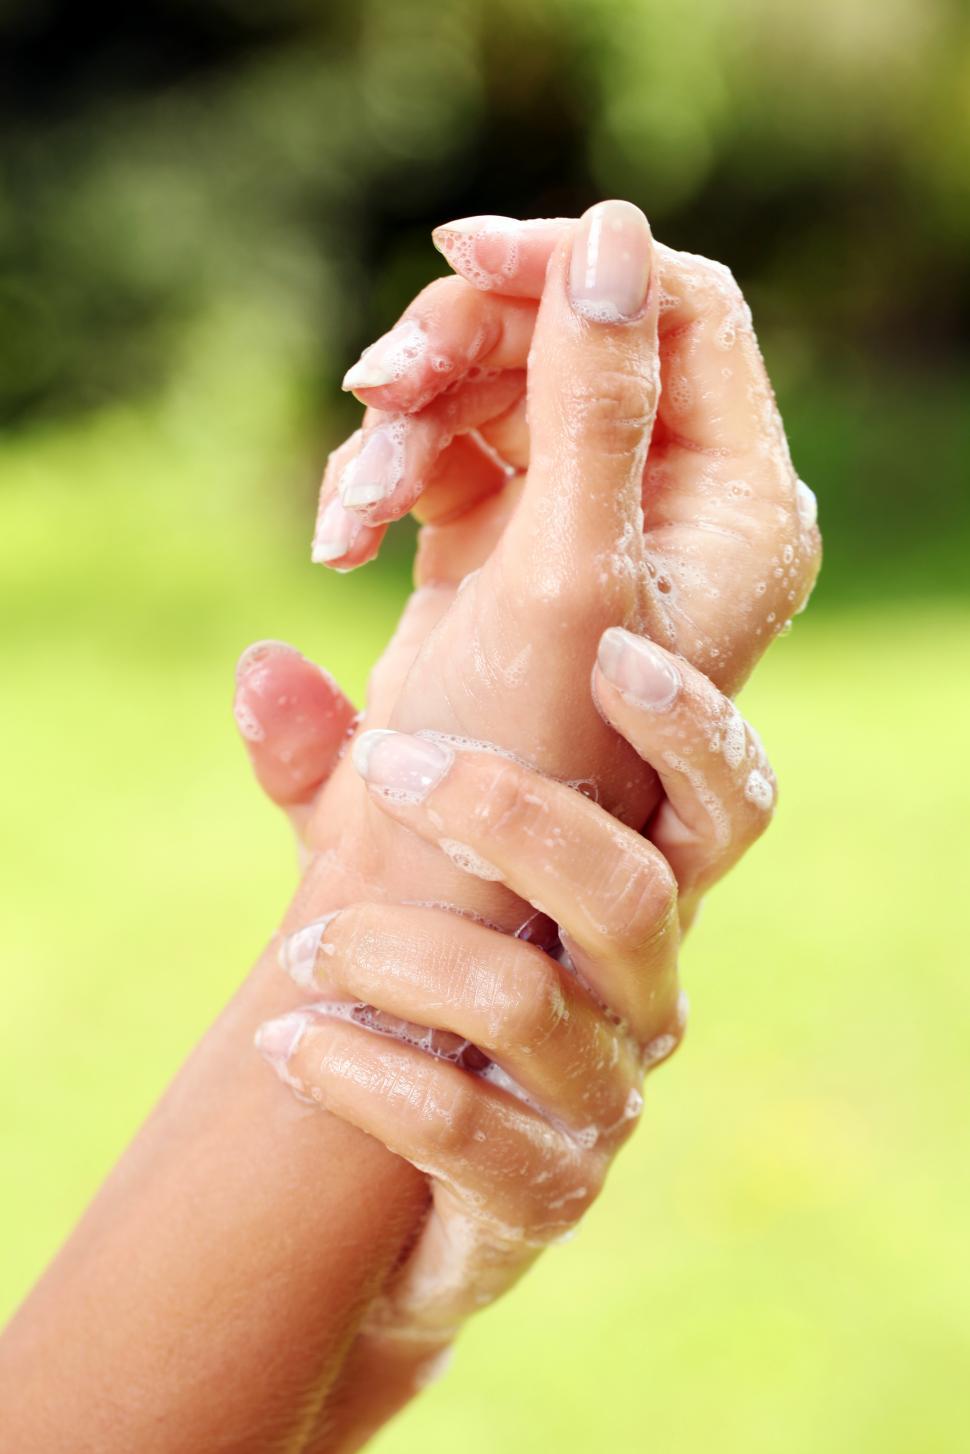 Free Image of hands in soap 